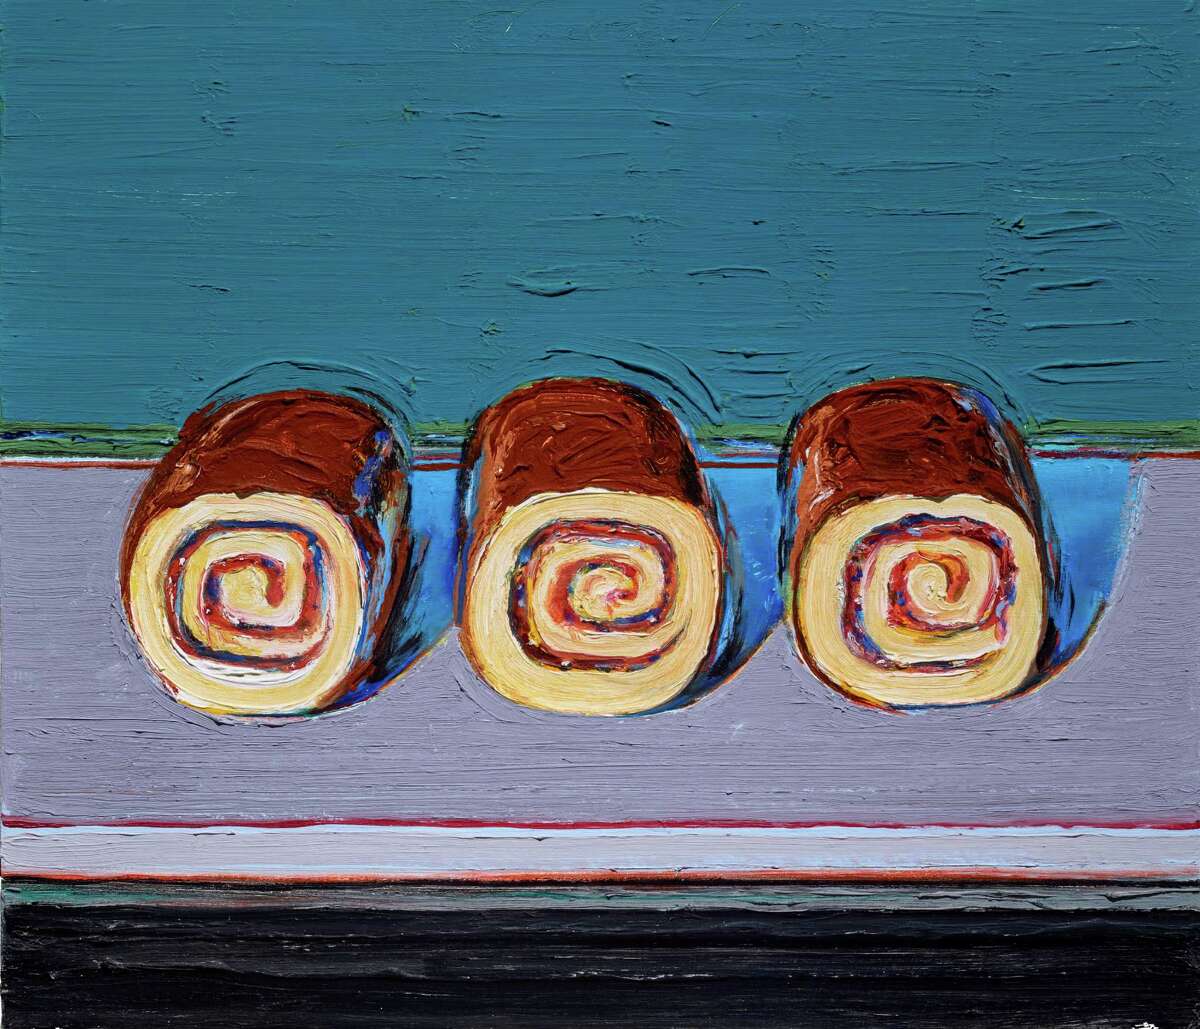 Wayne Thiebaud's "Jelly Rolls (for Morton)", an oil painting from 2008, is among works on view in "Two Centuries of American Still-Life Painting: The Frank and Michelle Hevrdejs Collection" at the Museum of Fine Arts, Houston, Jan. 14-April 9. The couple have donated the works to the MFAH.